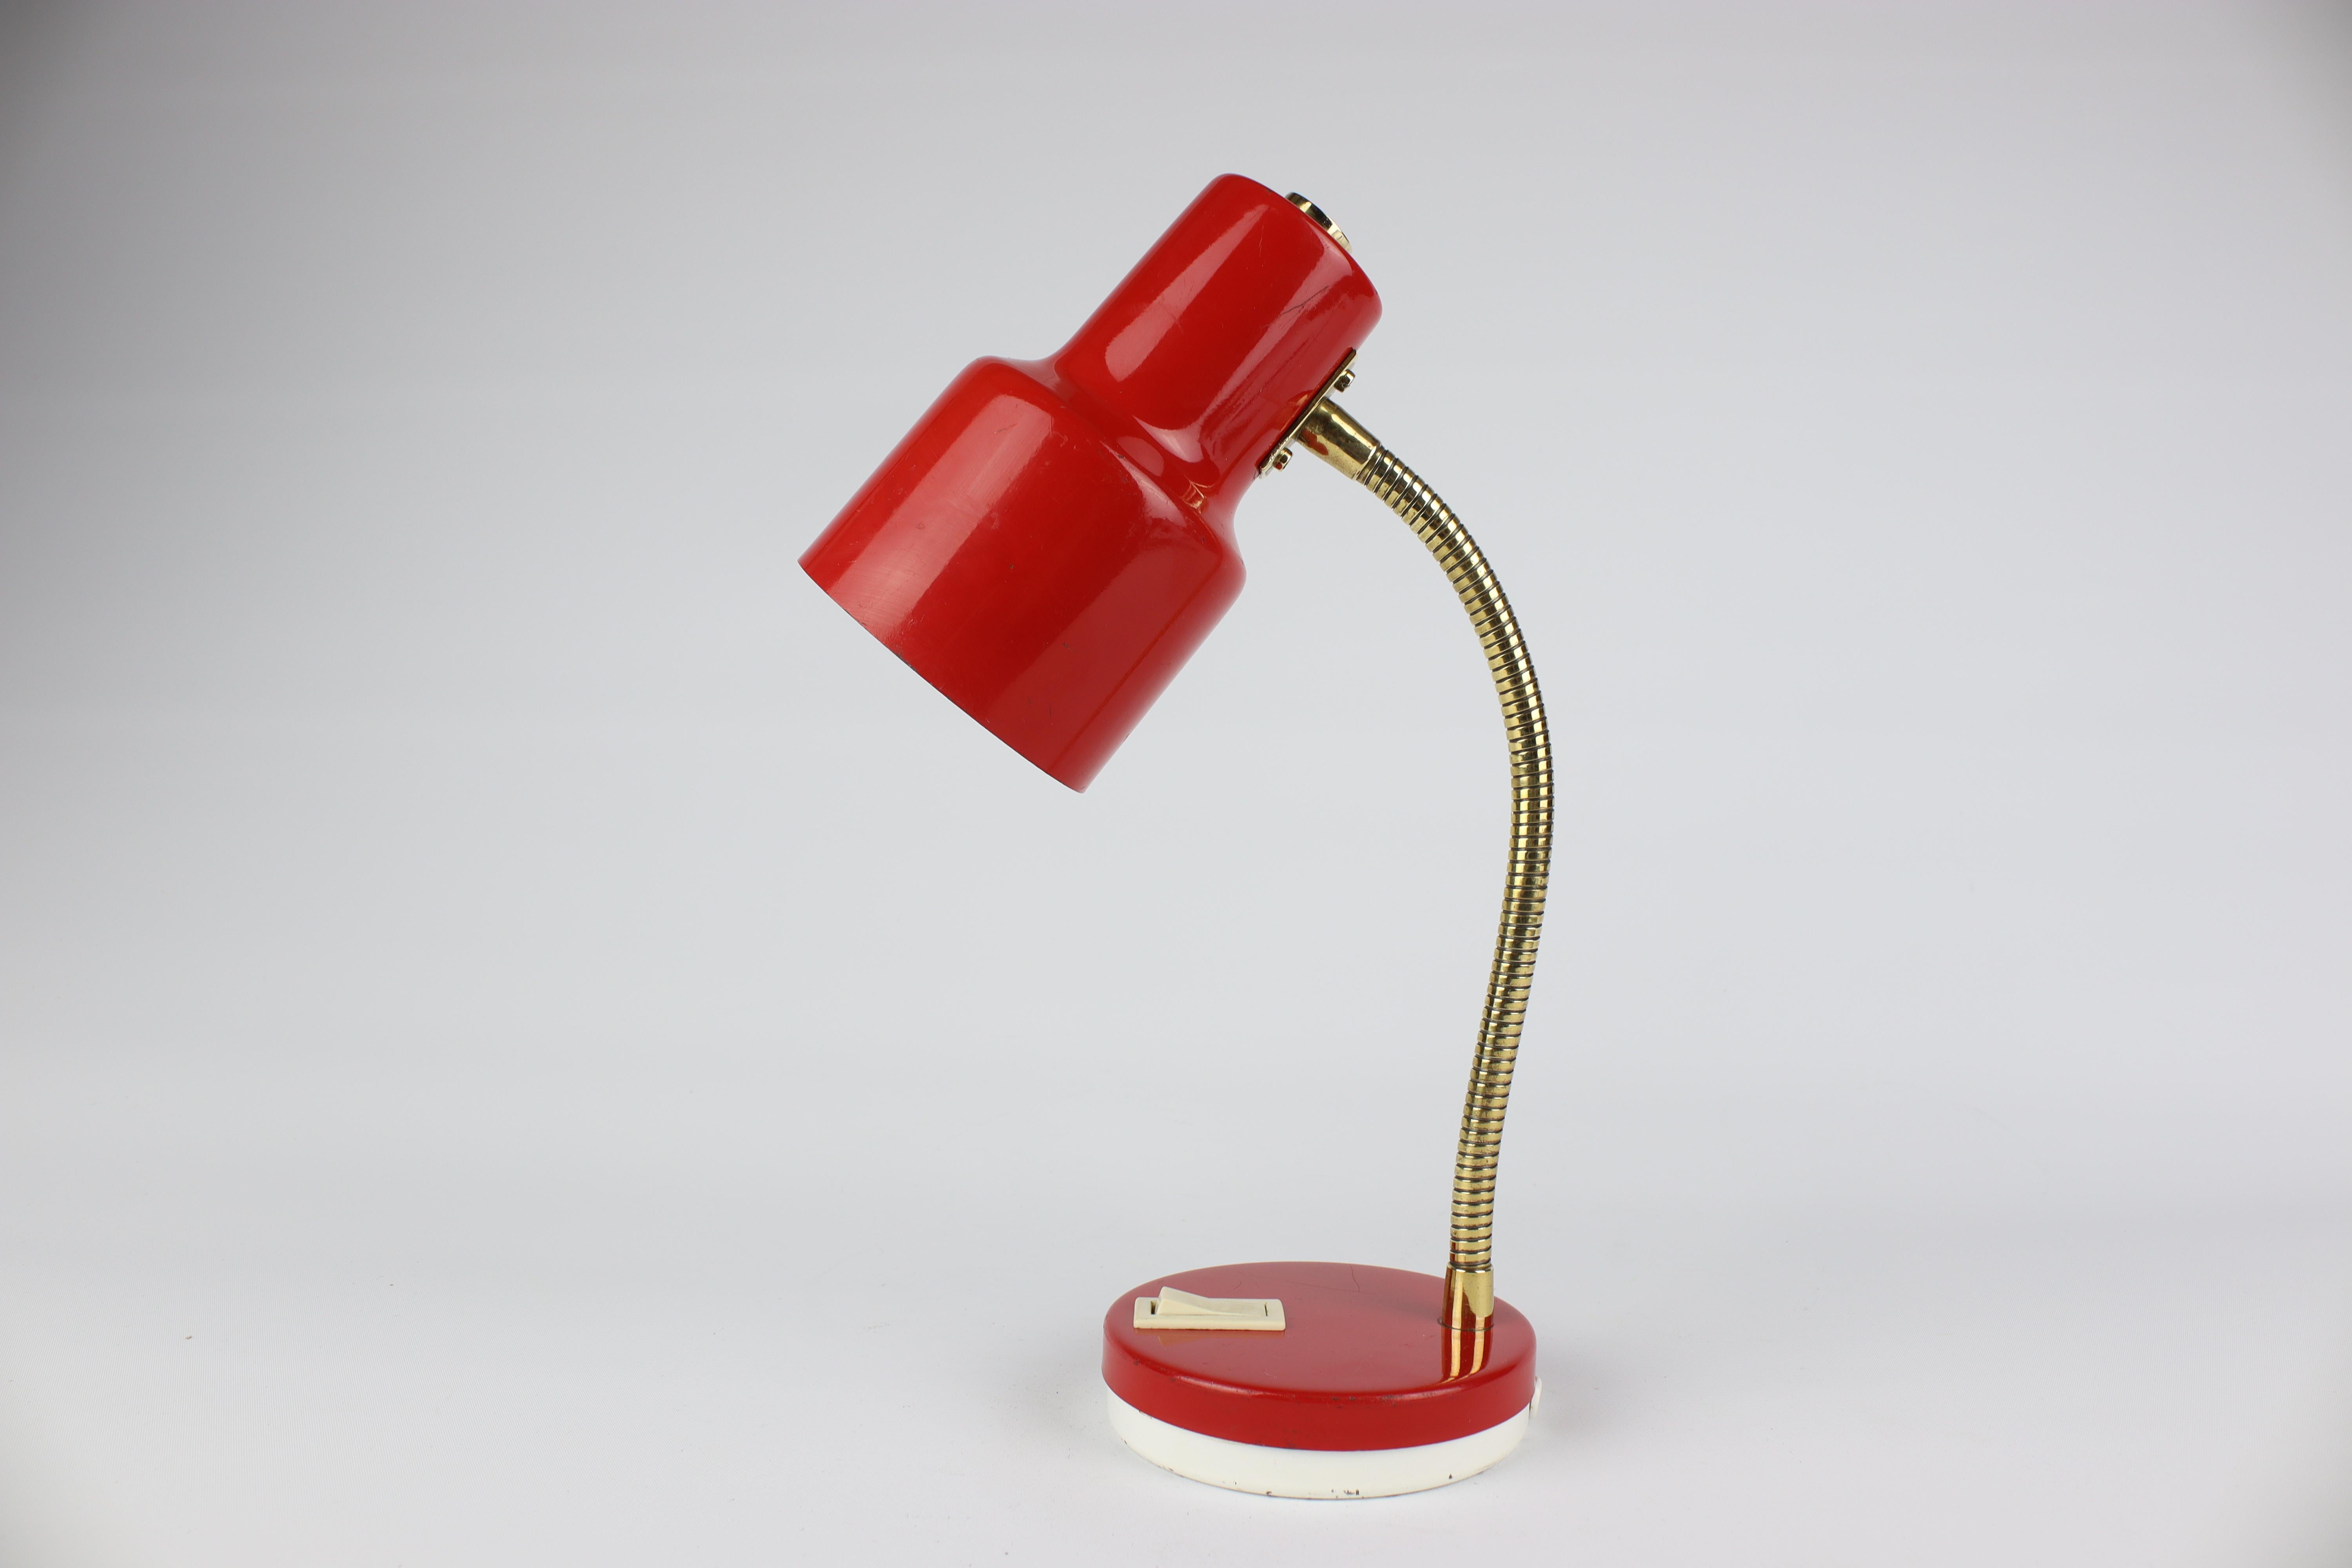 Czech Table Small Red Retro Lamp